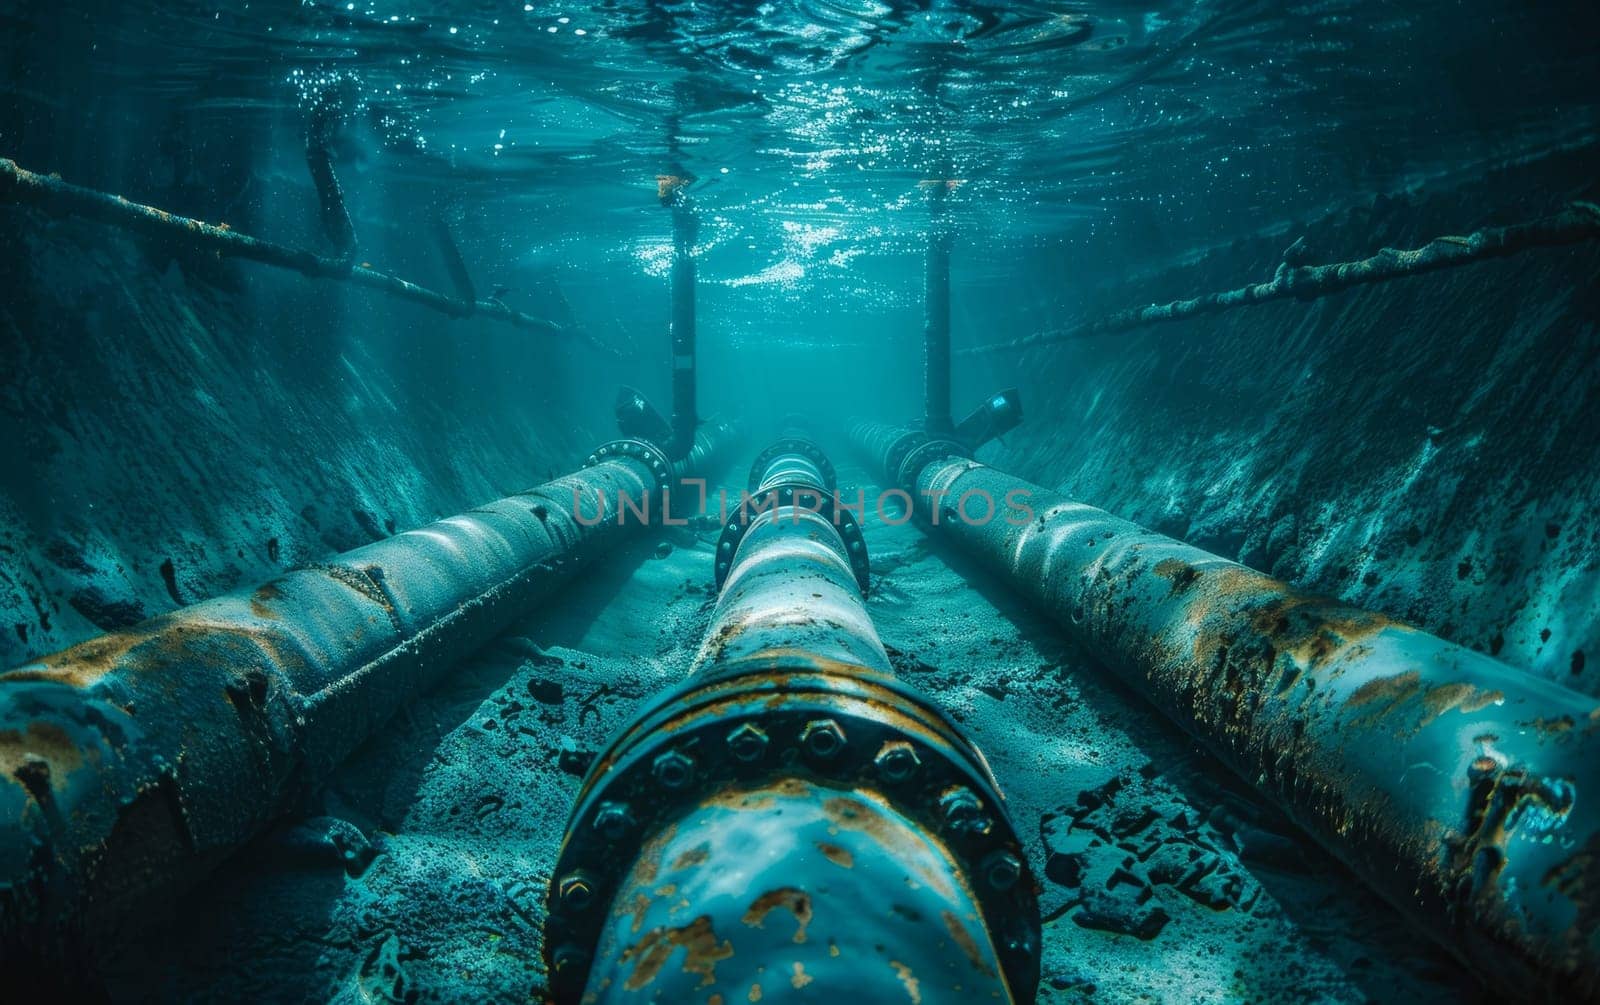 Underwater pipeline leading into ocean depths, sunlight filtering through surface by sfinks